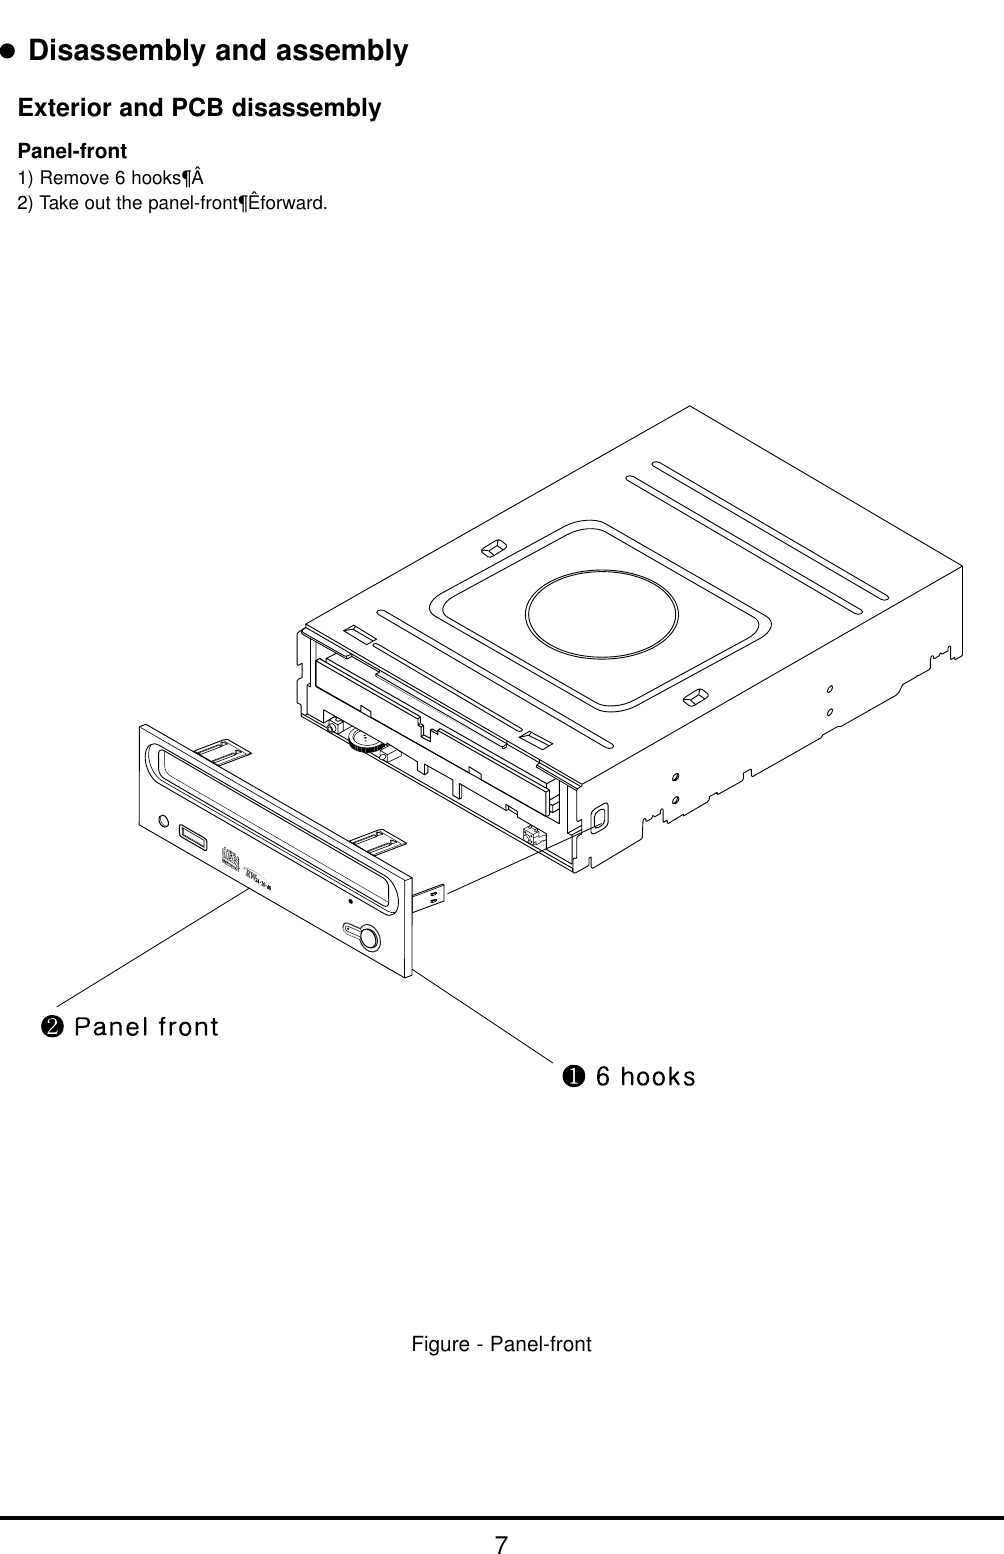 7Disassembly and assemblyPanel-frontExterior and PCB disassembly1) Remove 6 hooks¶Â  2) Take out the panel-front¶Êforward.Figure - Panel-front